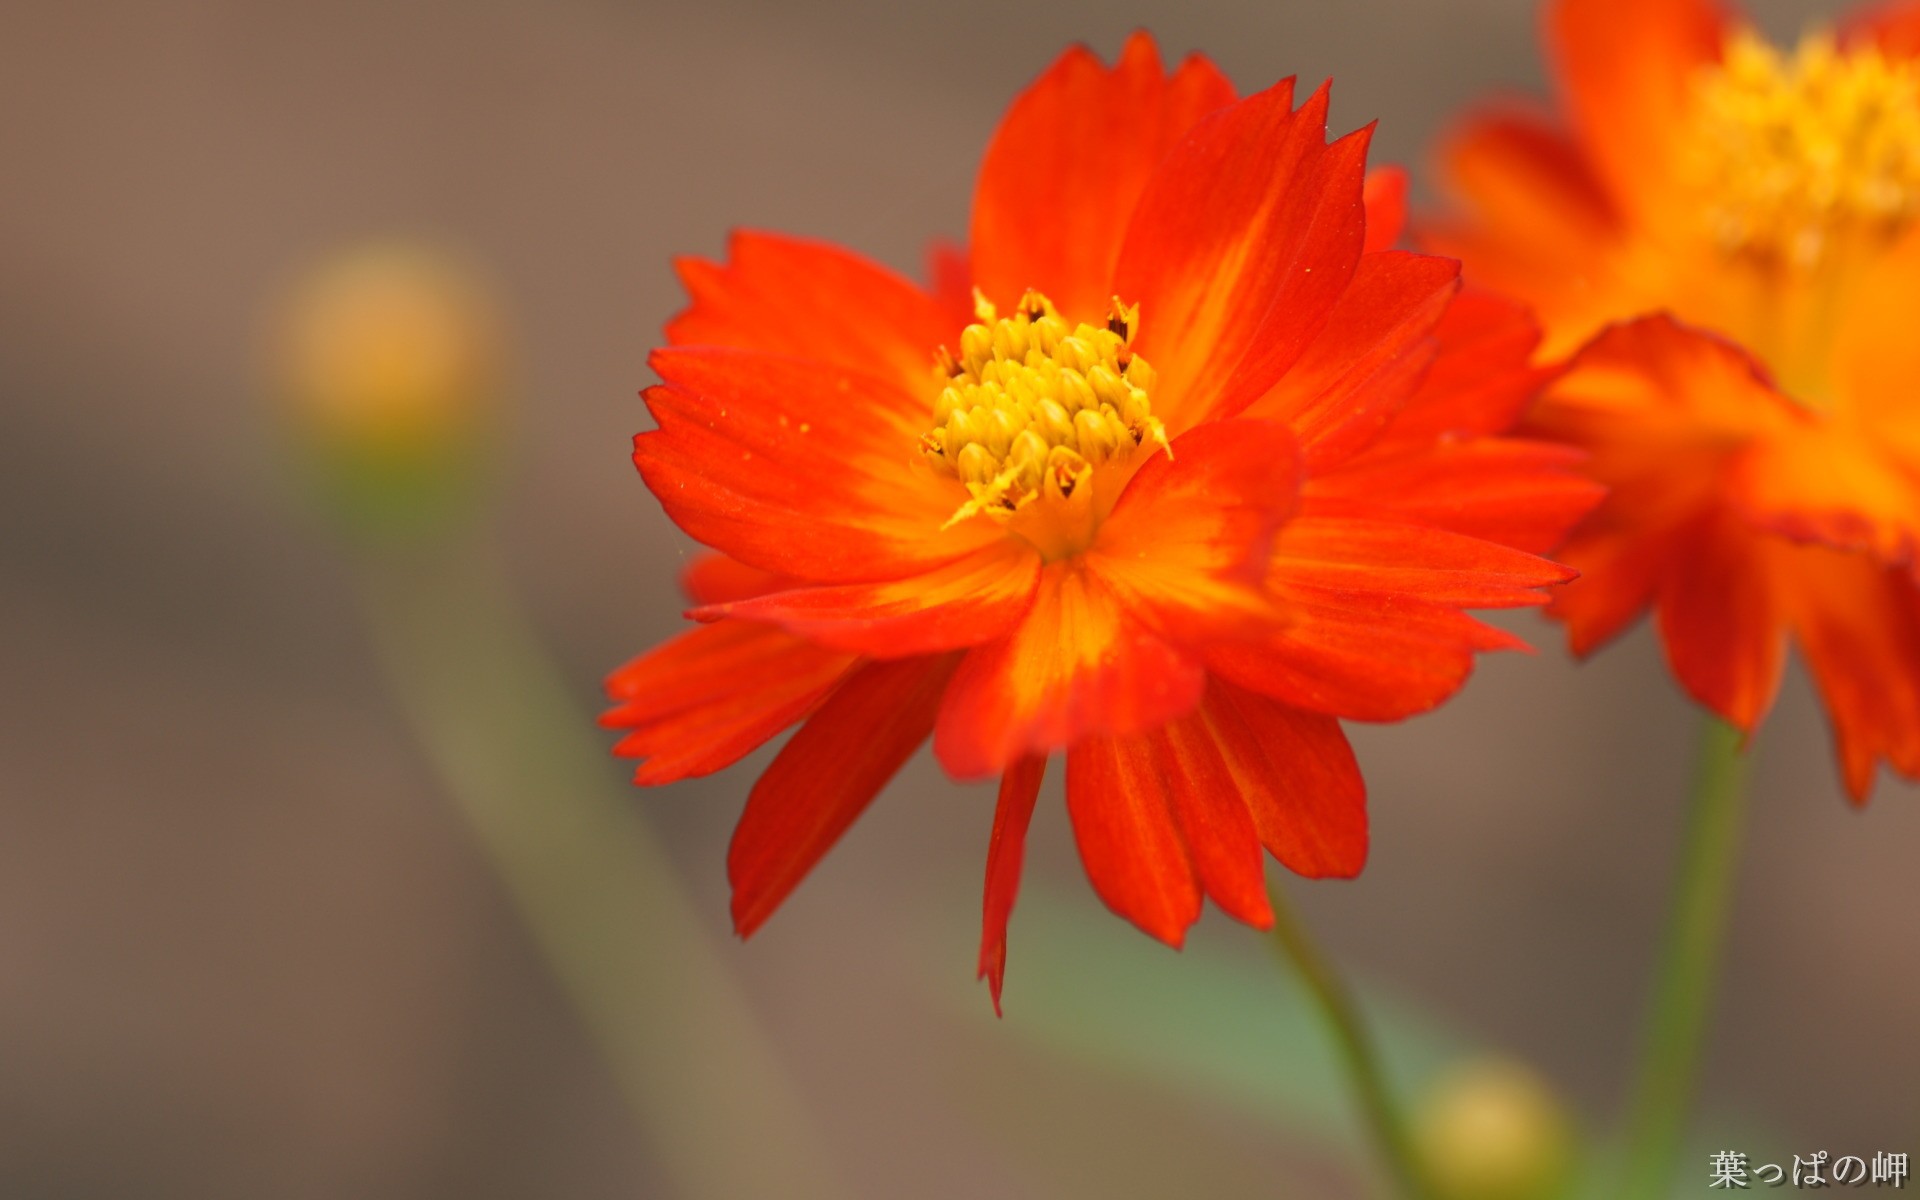 Orange yellow flower wallpapers and images - wallpapers ...